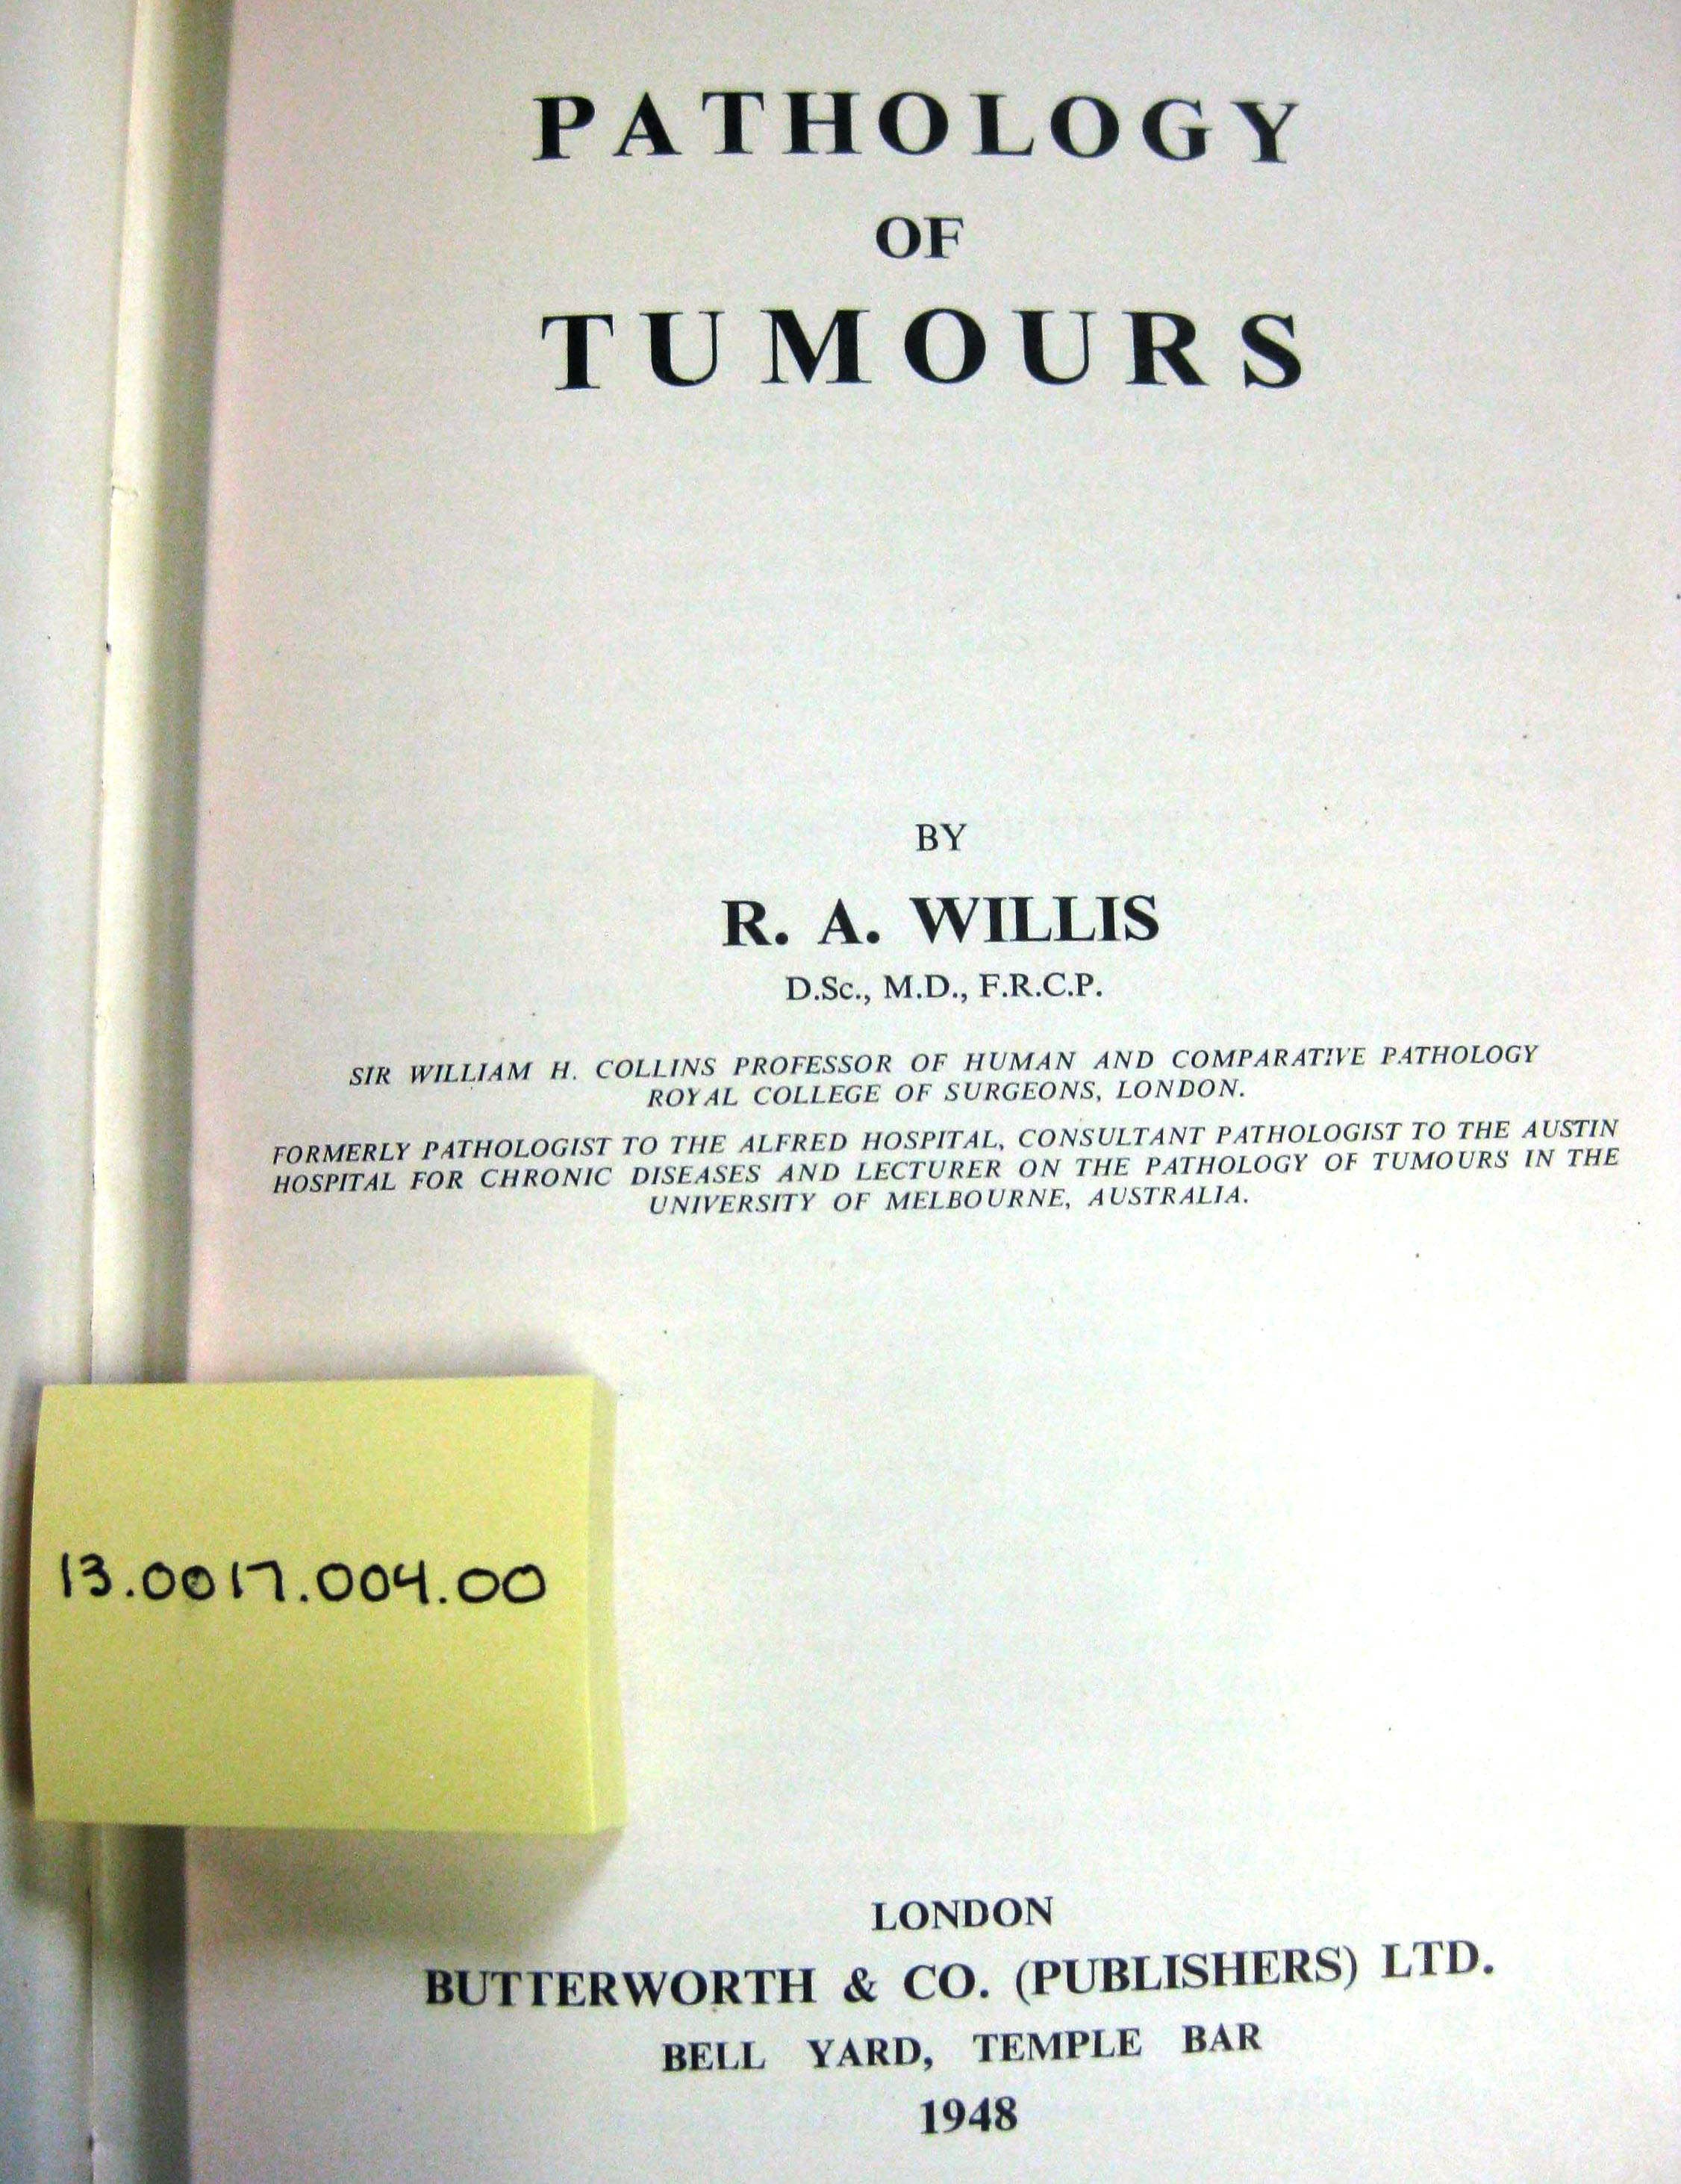 Photo of Anthology of Tumours book inside page